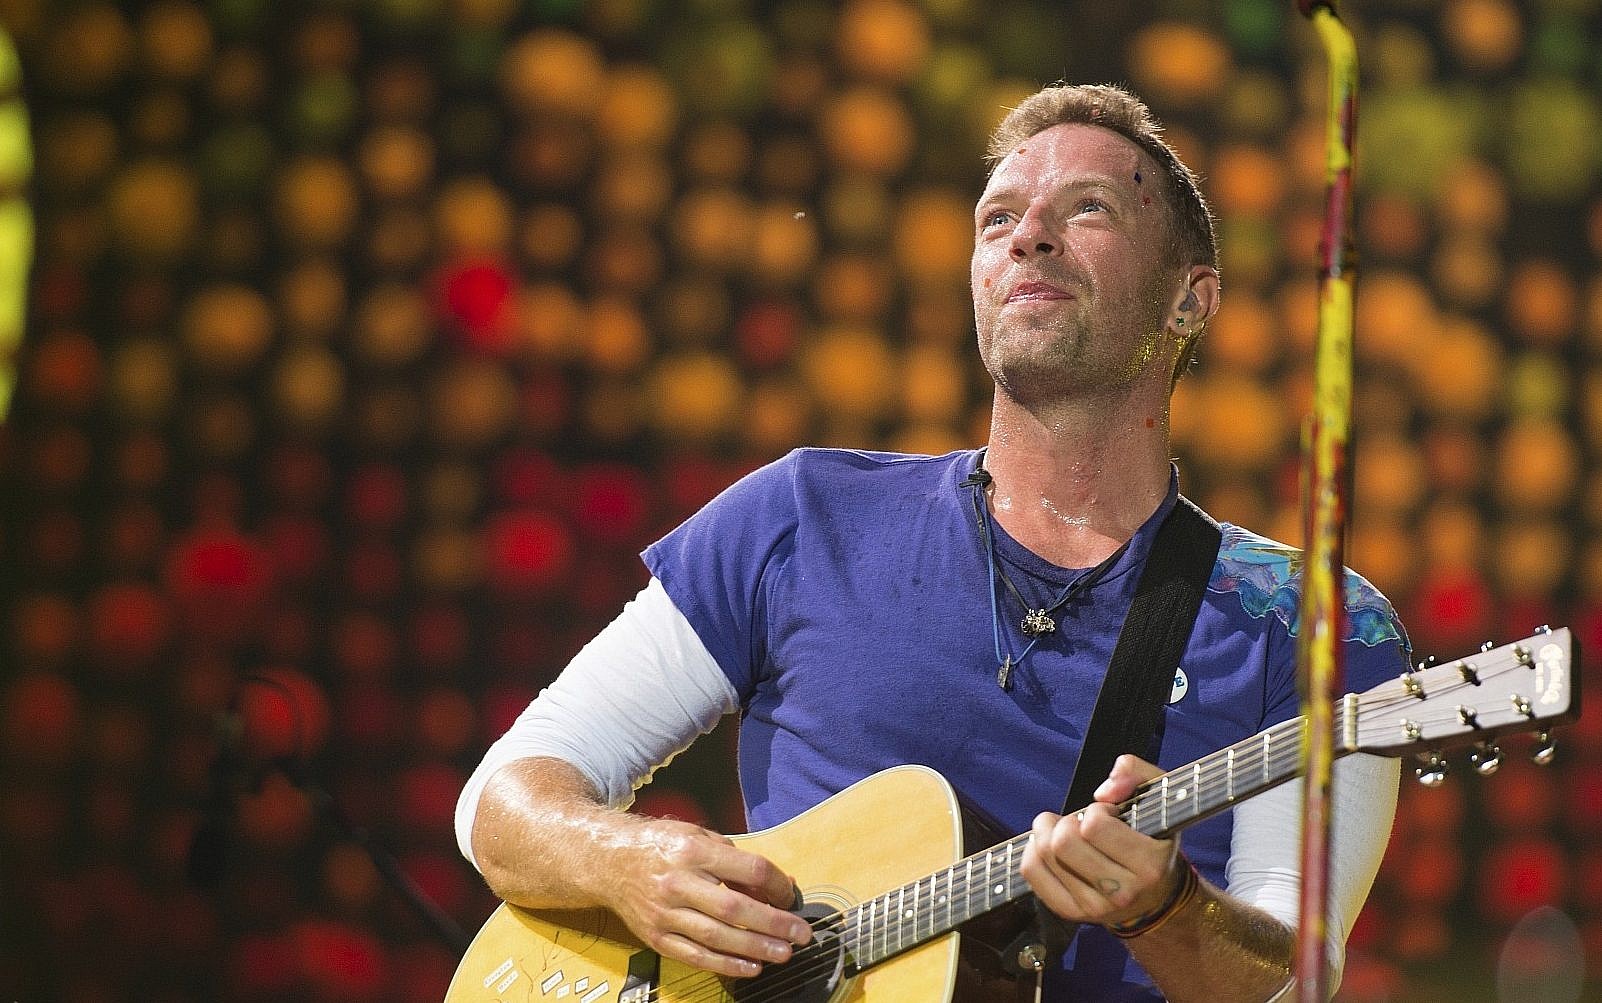 Chris Martin Serenades Manila’s Traffic Woes Onstage, Calls It “Completely Insane”